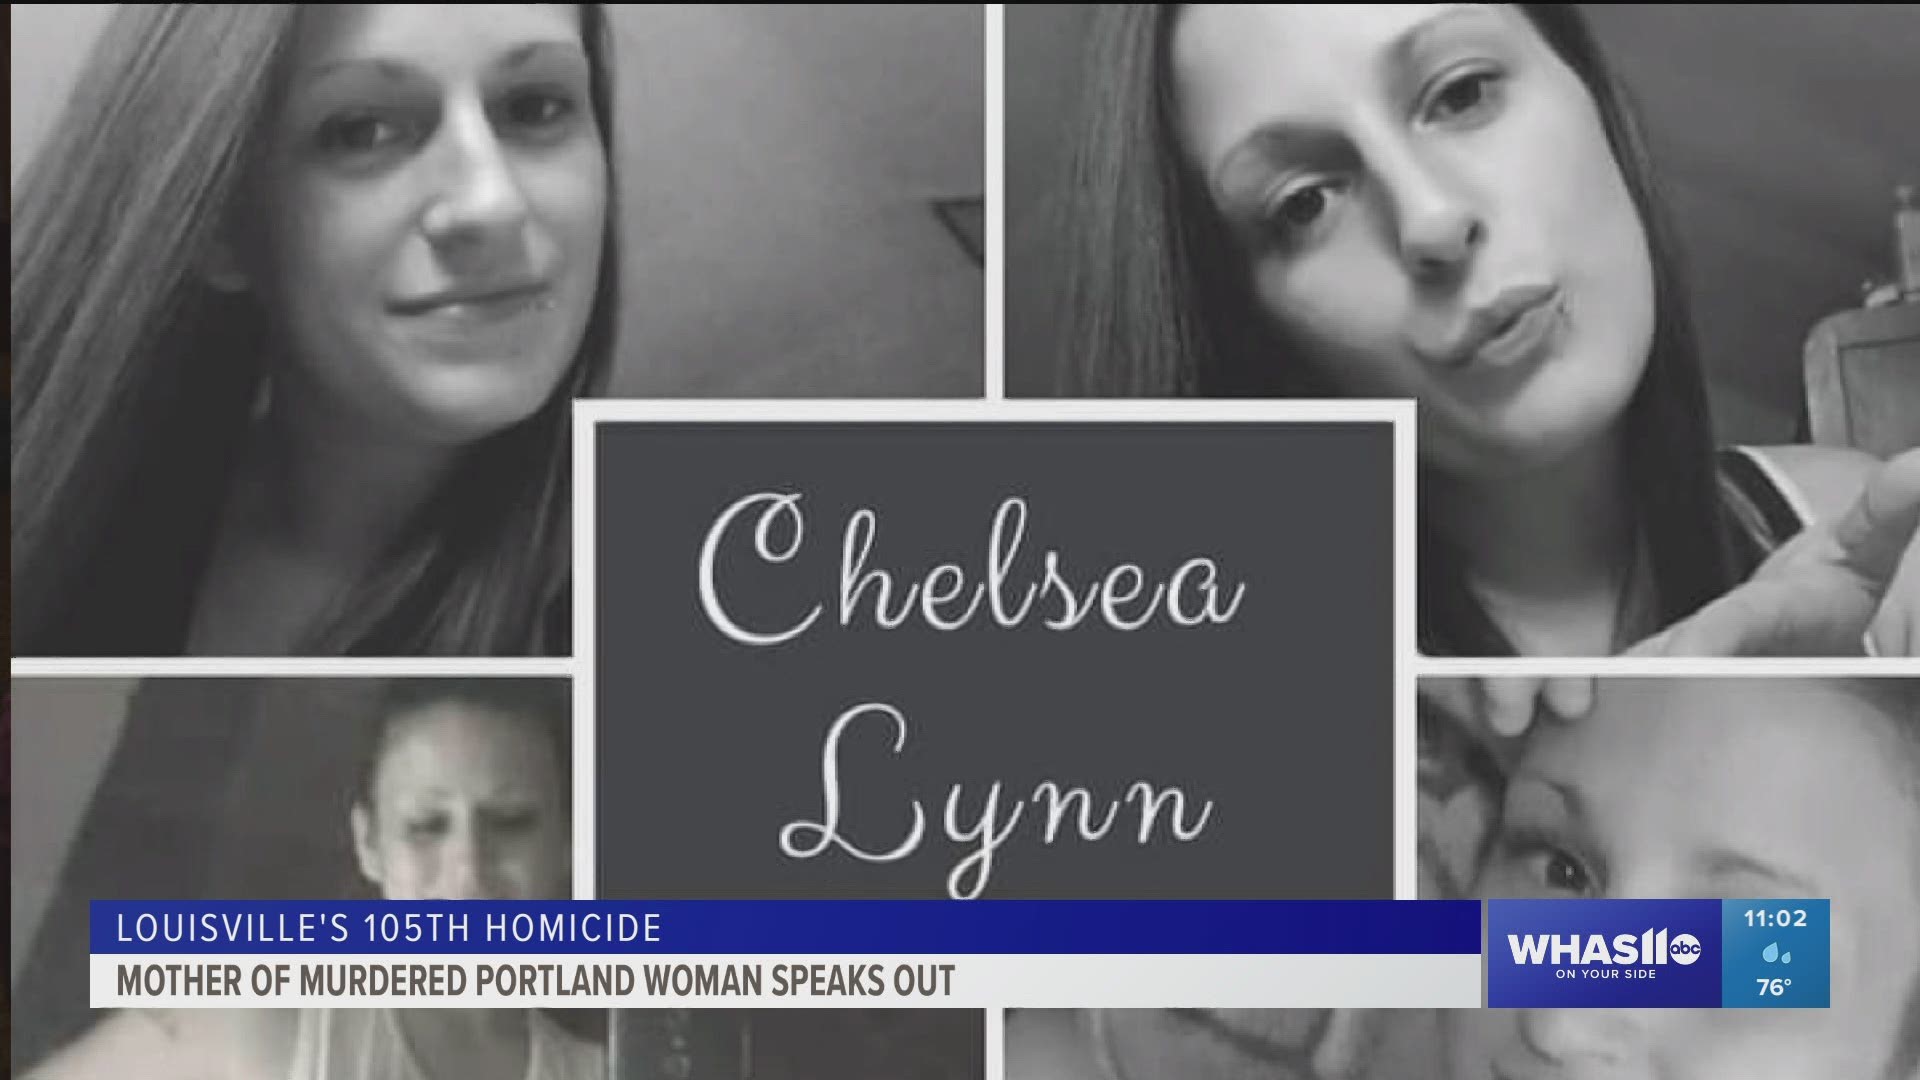 Chelsea Lynch was shot and killed on July 9 -- her birthday. Her family is searching for answers into why she was killed.